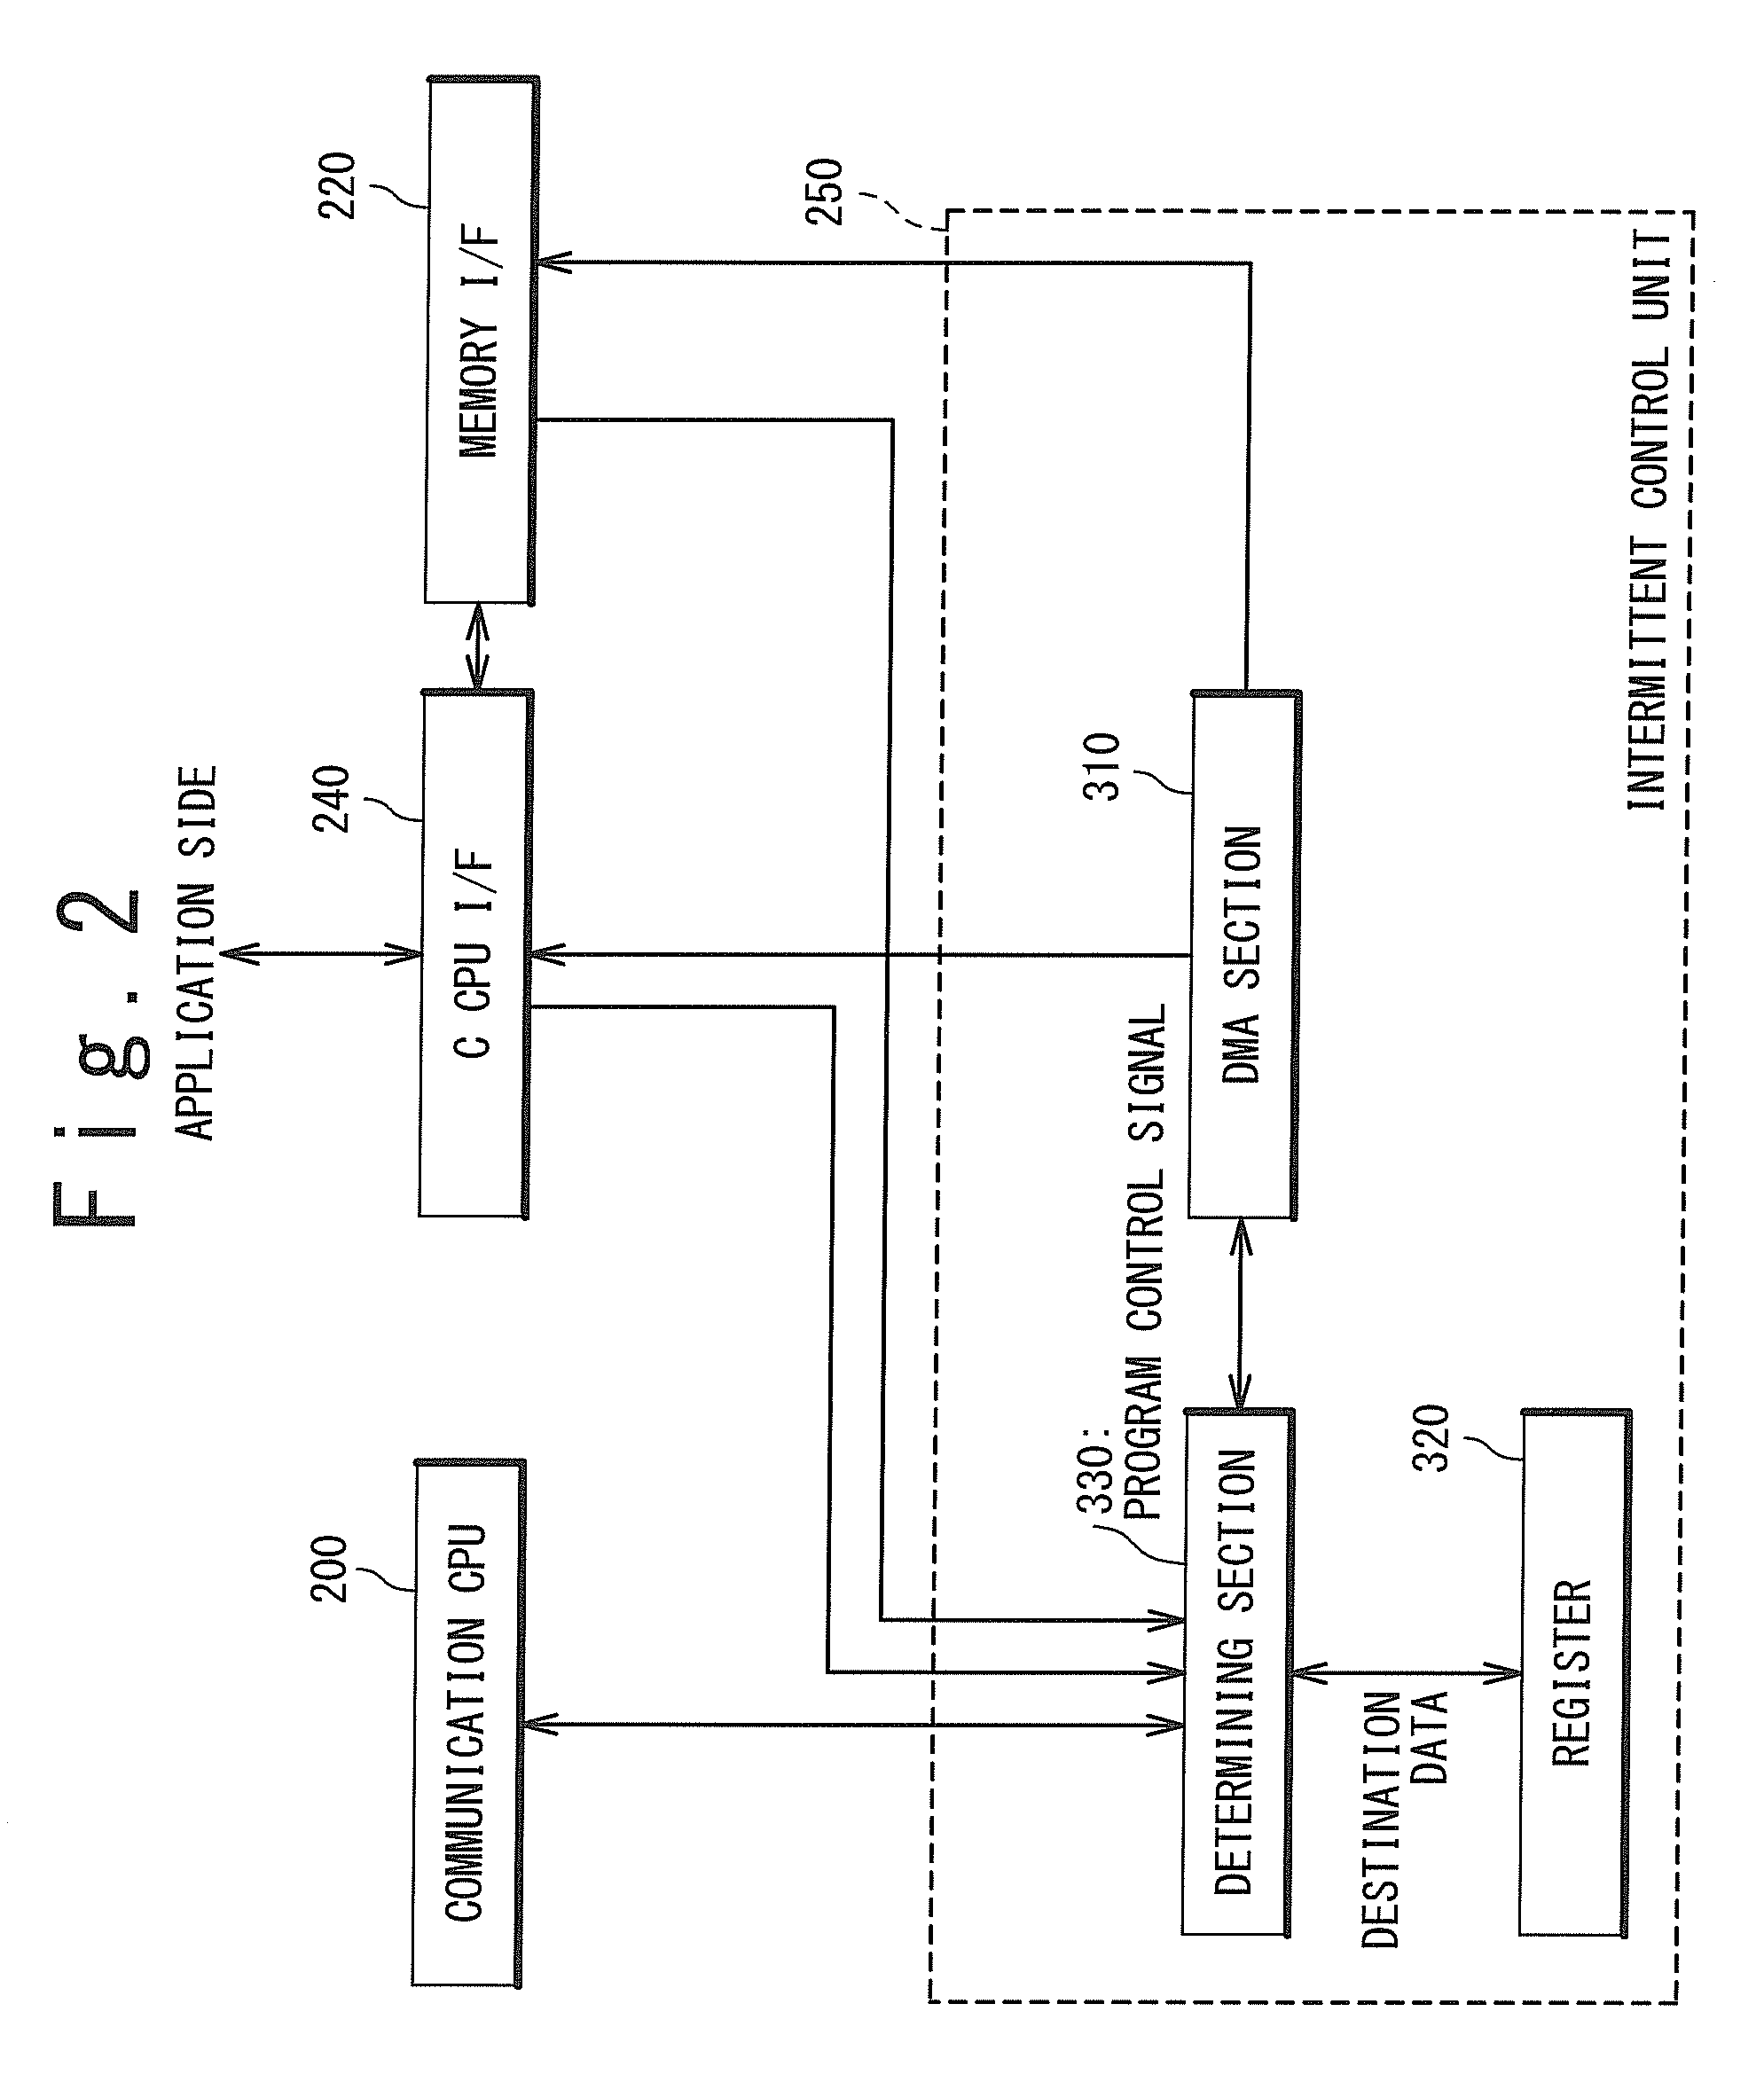 Mobile communication terminal and communication method